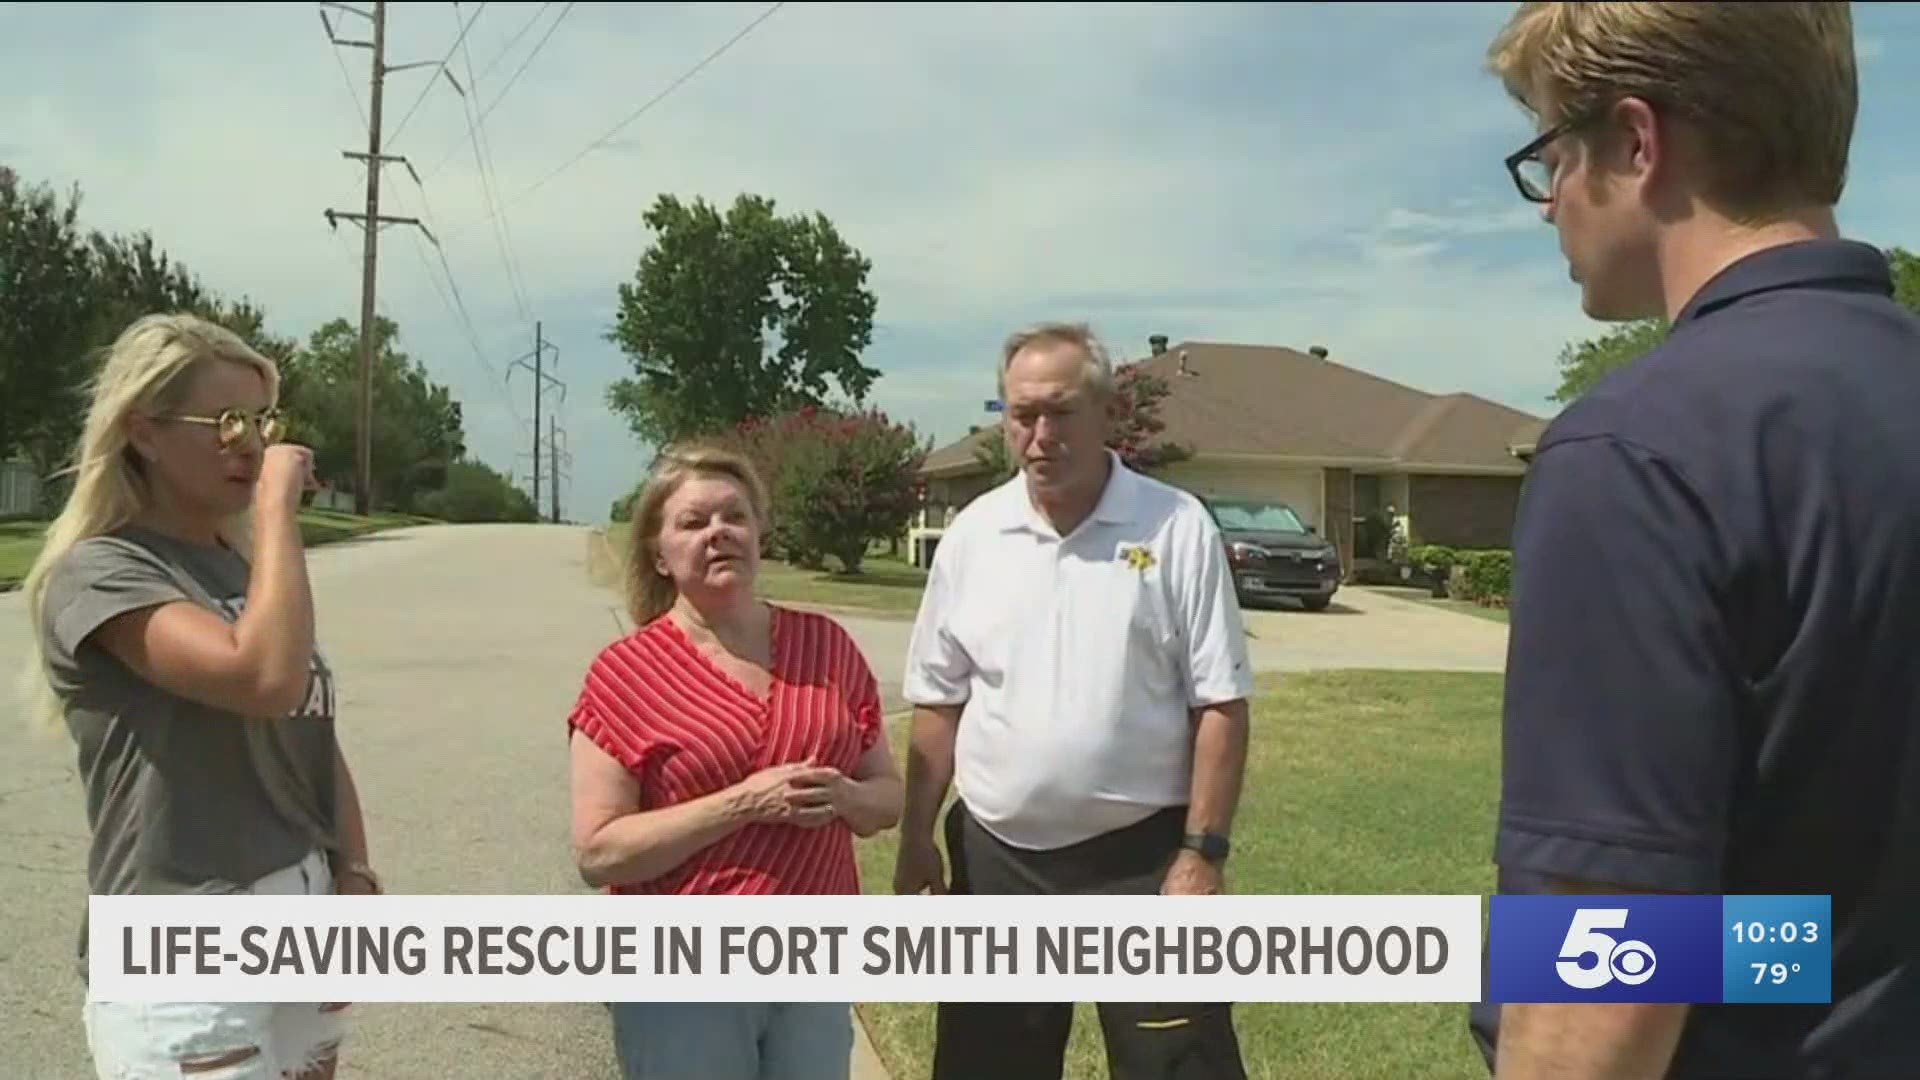 Life-saving rescue in Fort Smith neighborhood.